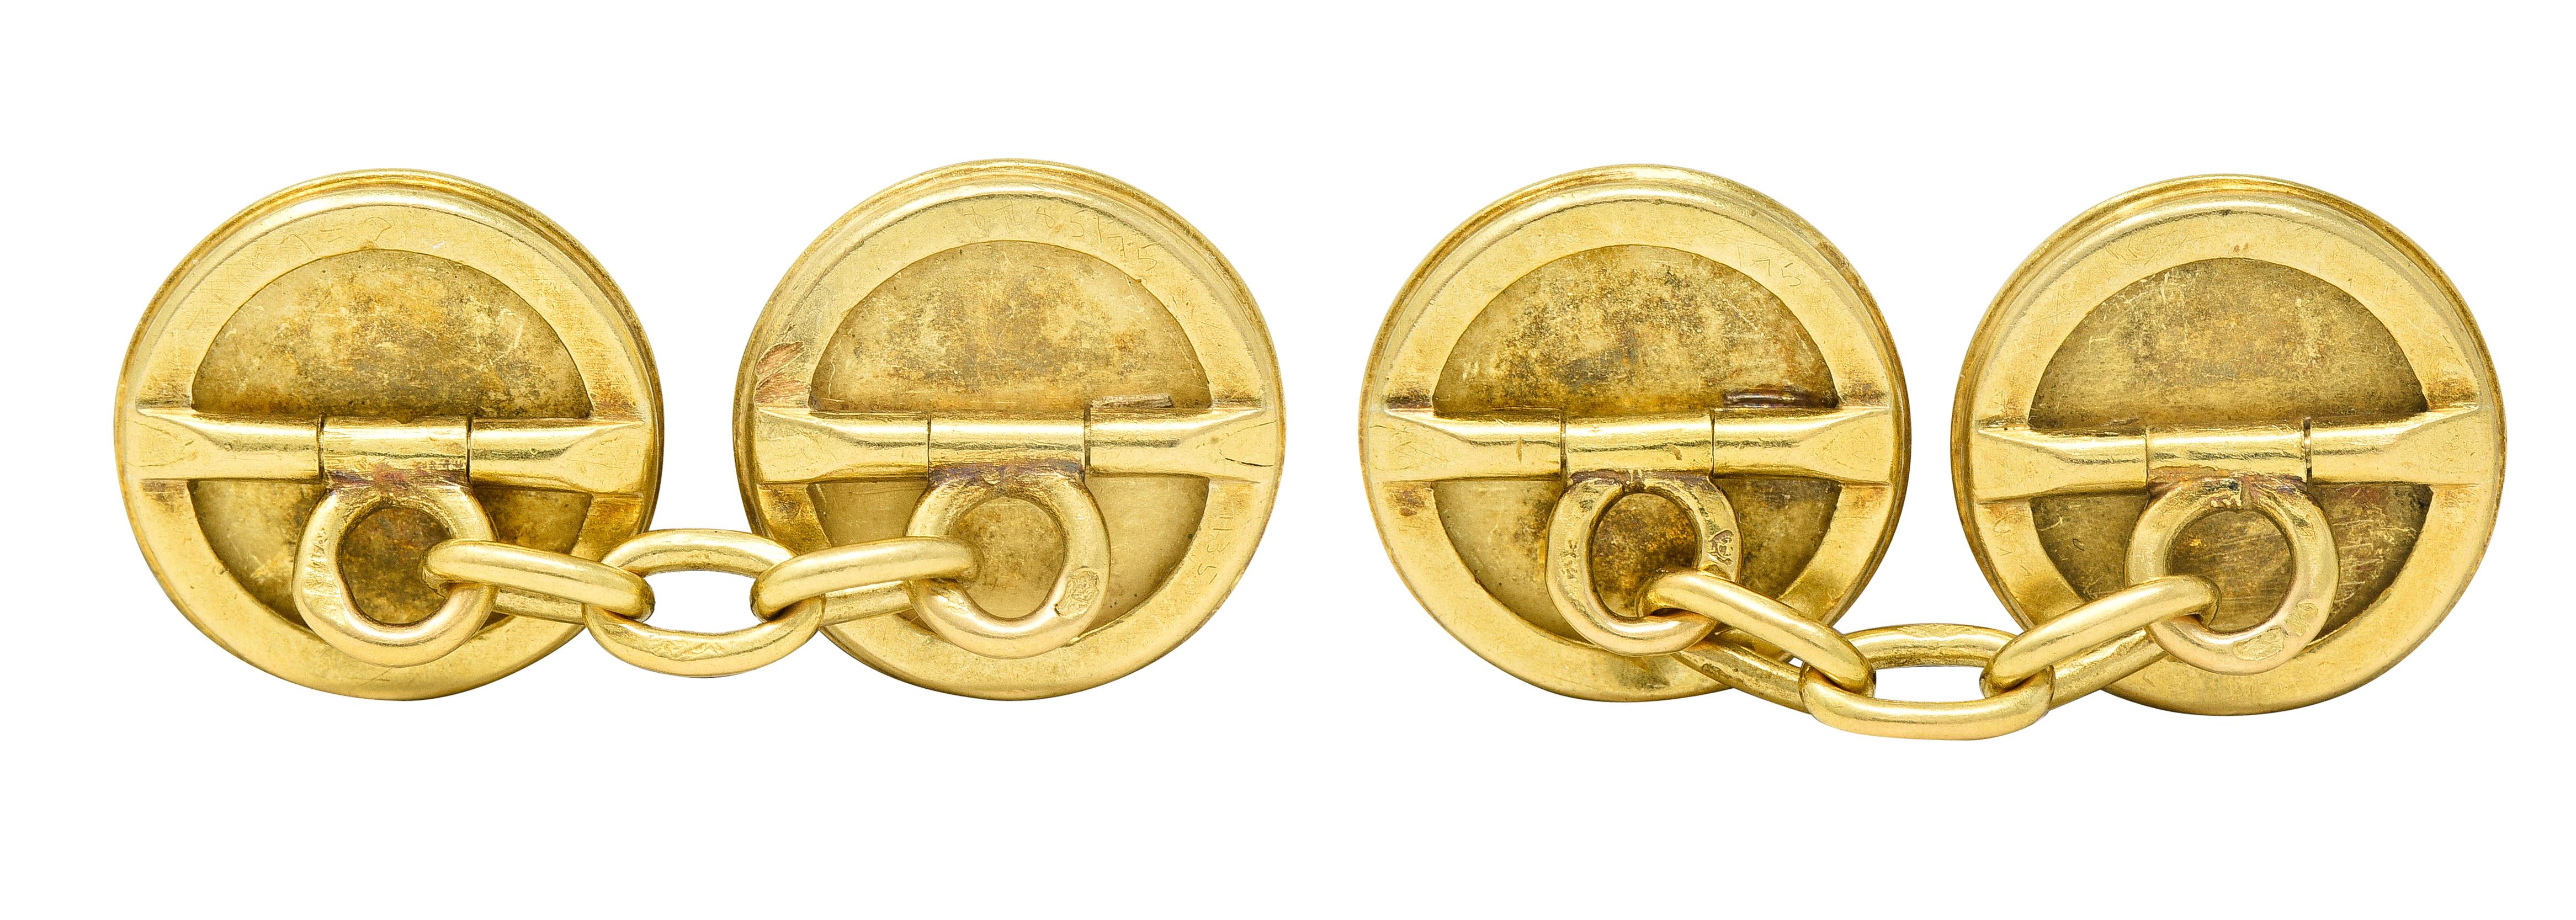 Art Nouveau French Enamel 18 Karat Yellow Gold Scarab Antique Cufflinks In Excellent Condition For Sale In Philadelphia, PA